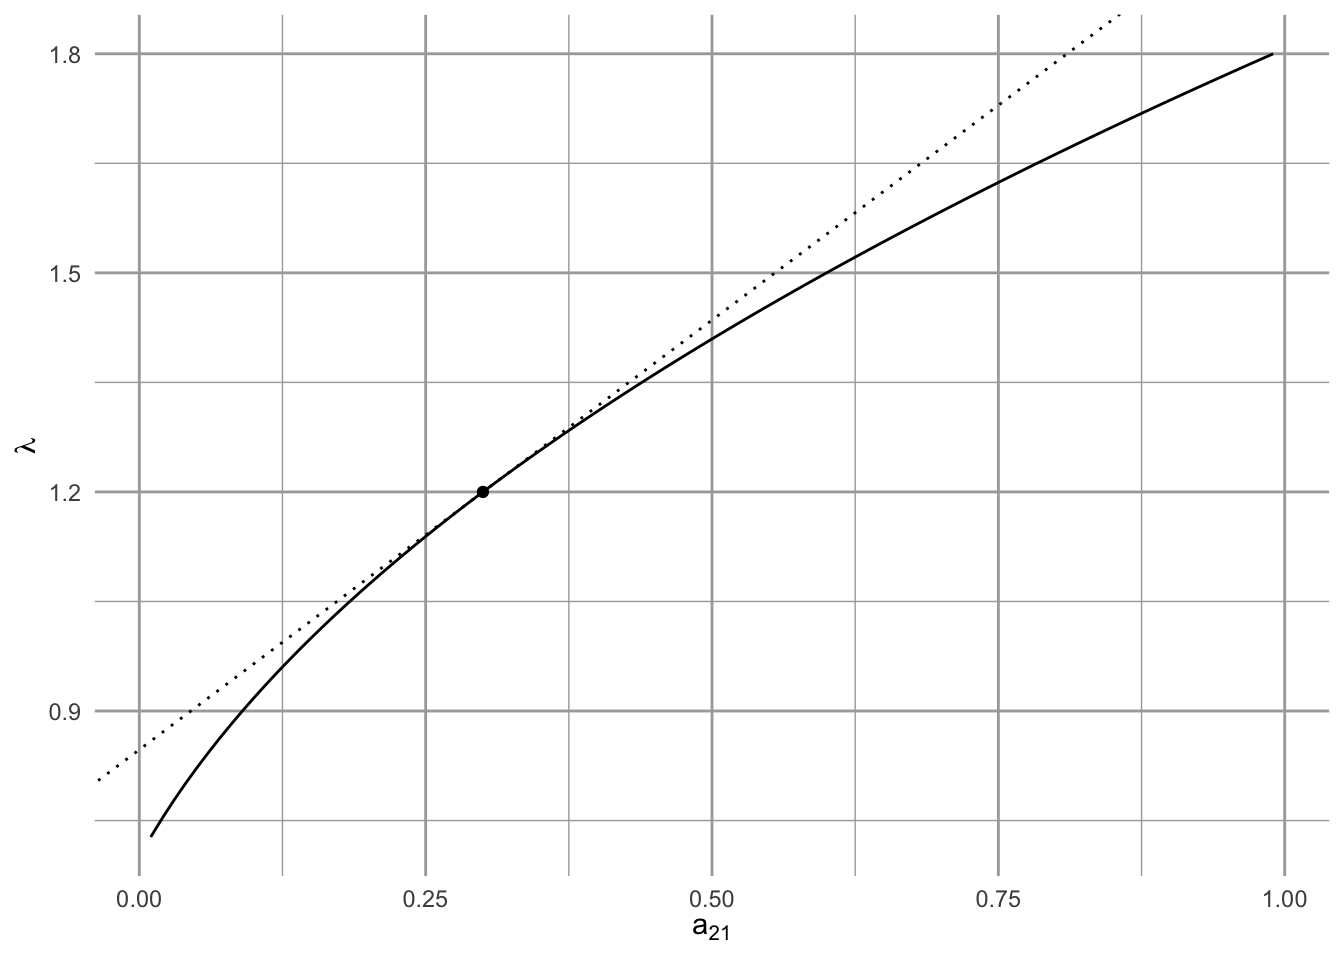 Sensitivities of lambda to transition elements are slopes. The dotted line is the calculated sensitivity of lambda to A[2,1], because it is the slope evaluated at A[2,1].